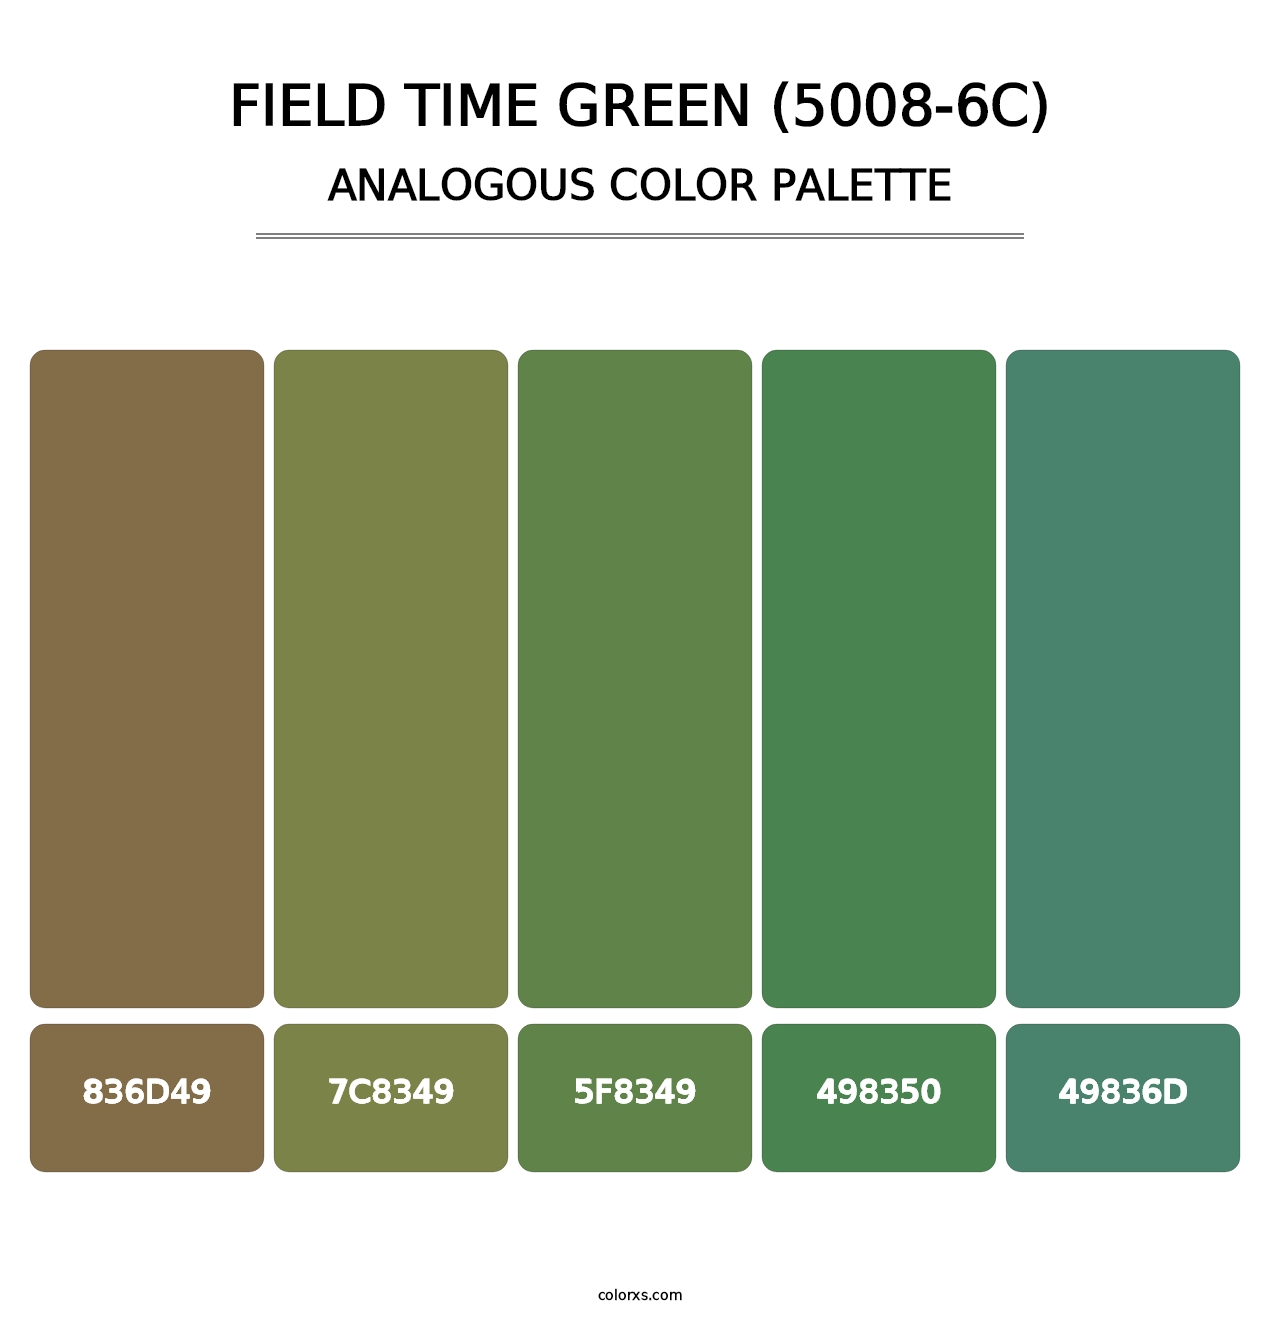 Field Time Green (5008-6C) - Analogous Color Palette